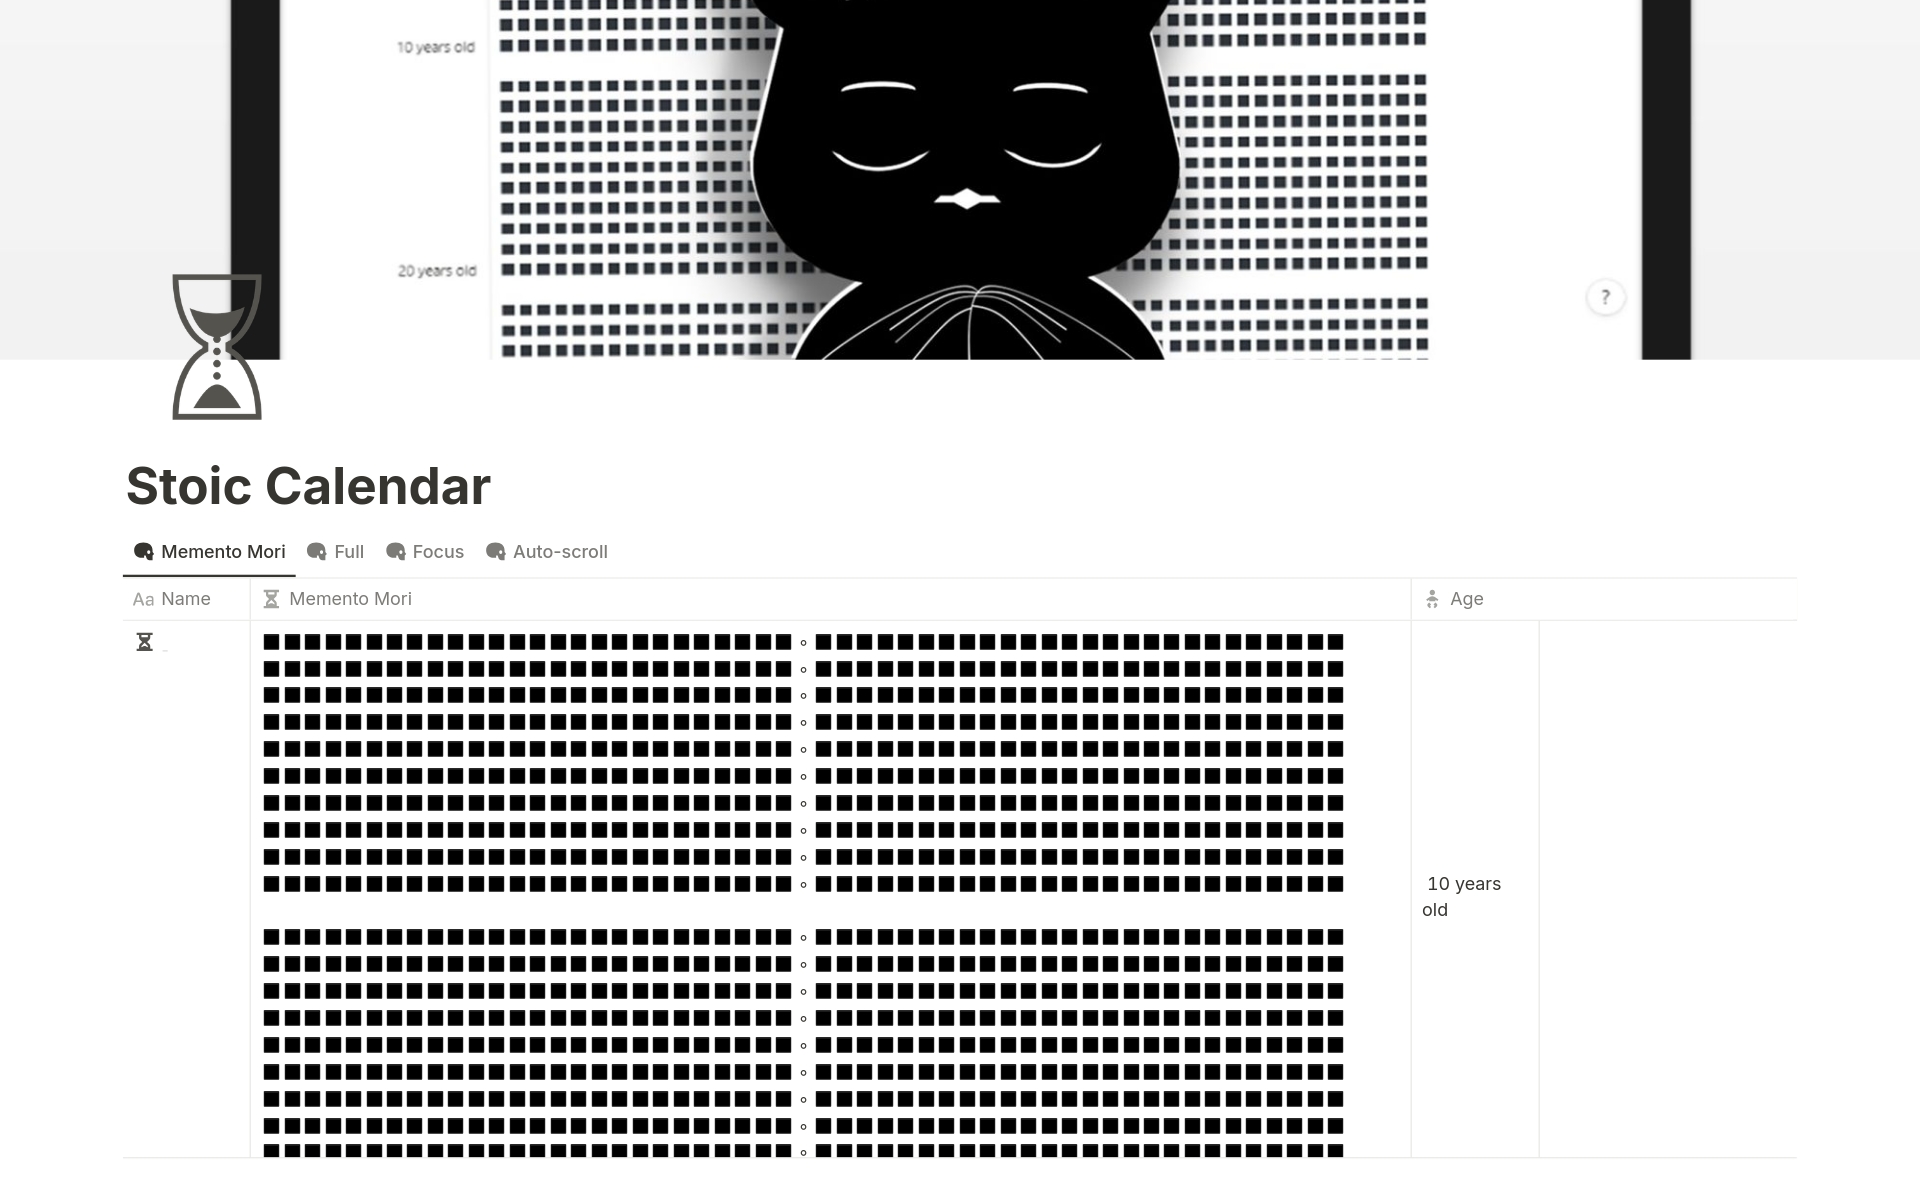 The first fully-automated stoic calendar in Notion. Watch the white squares turn black with each passing week.